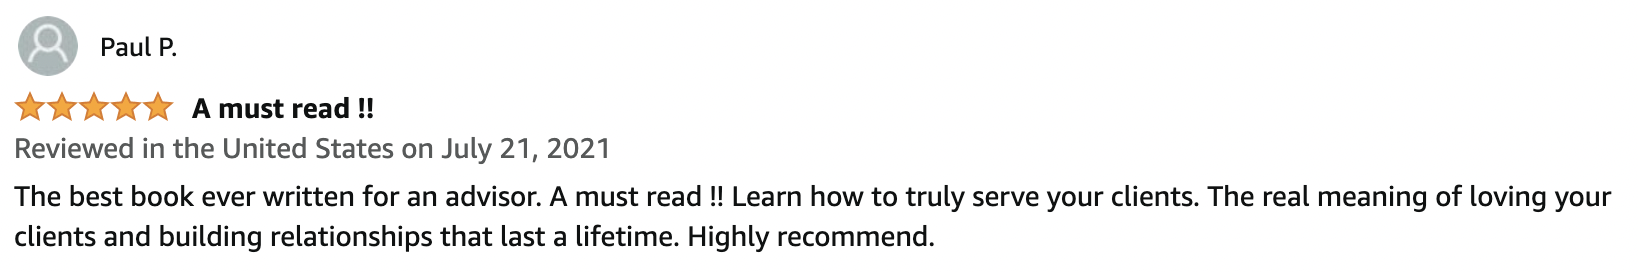 LOVE YOUR CLIENTS review 3.png